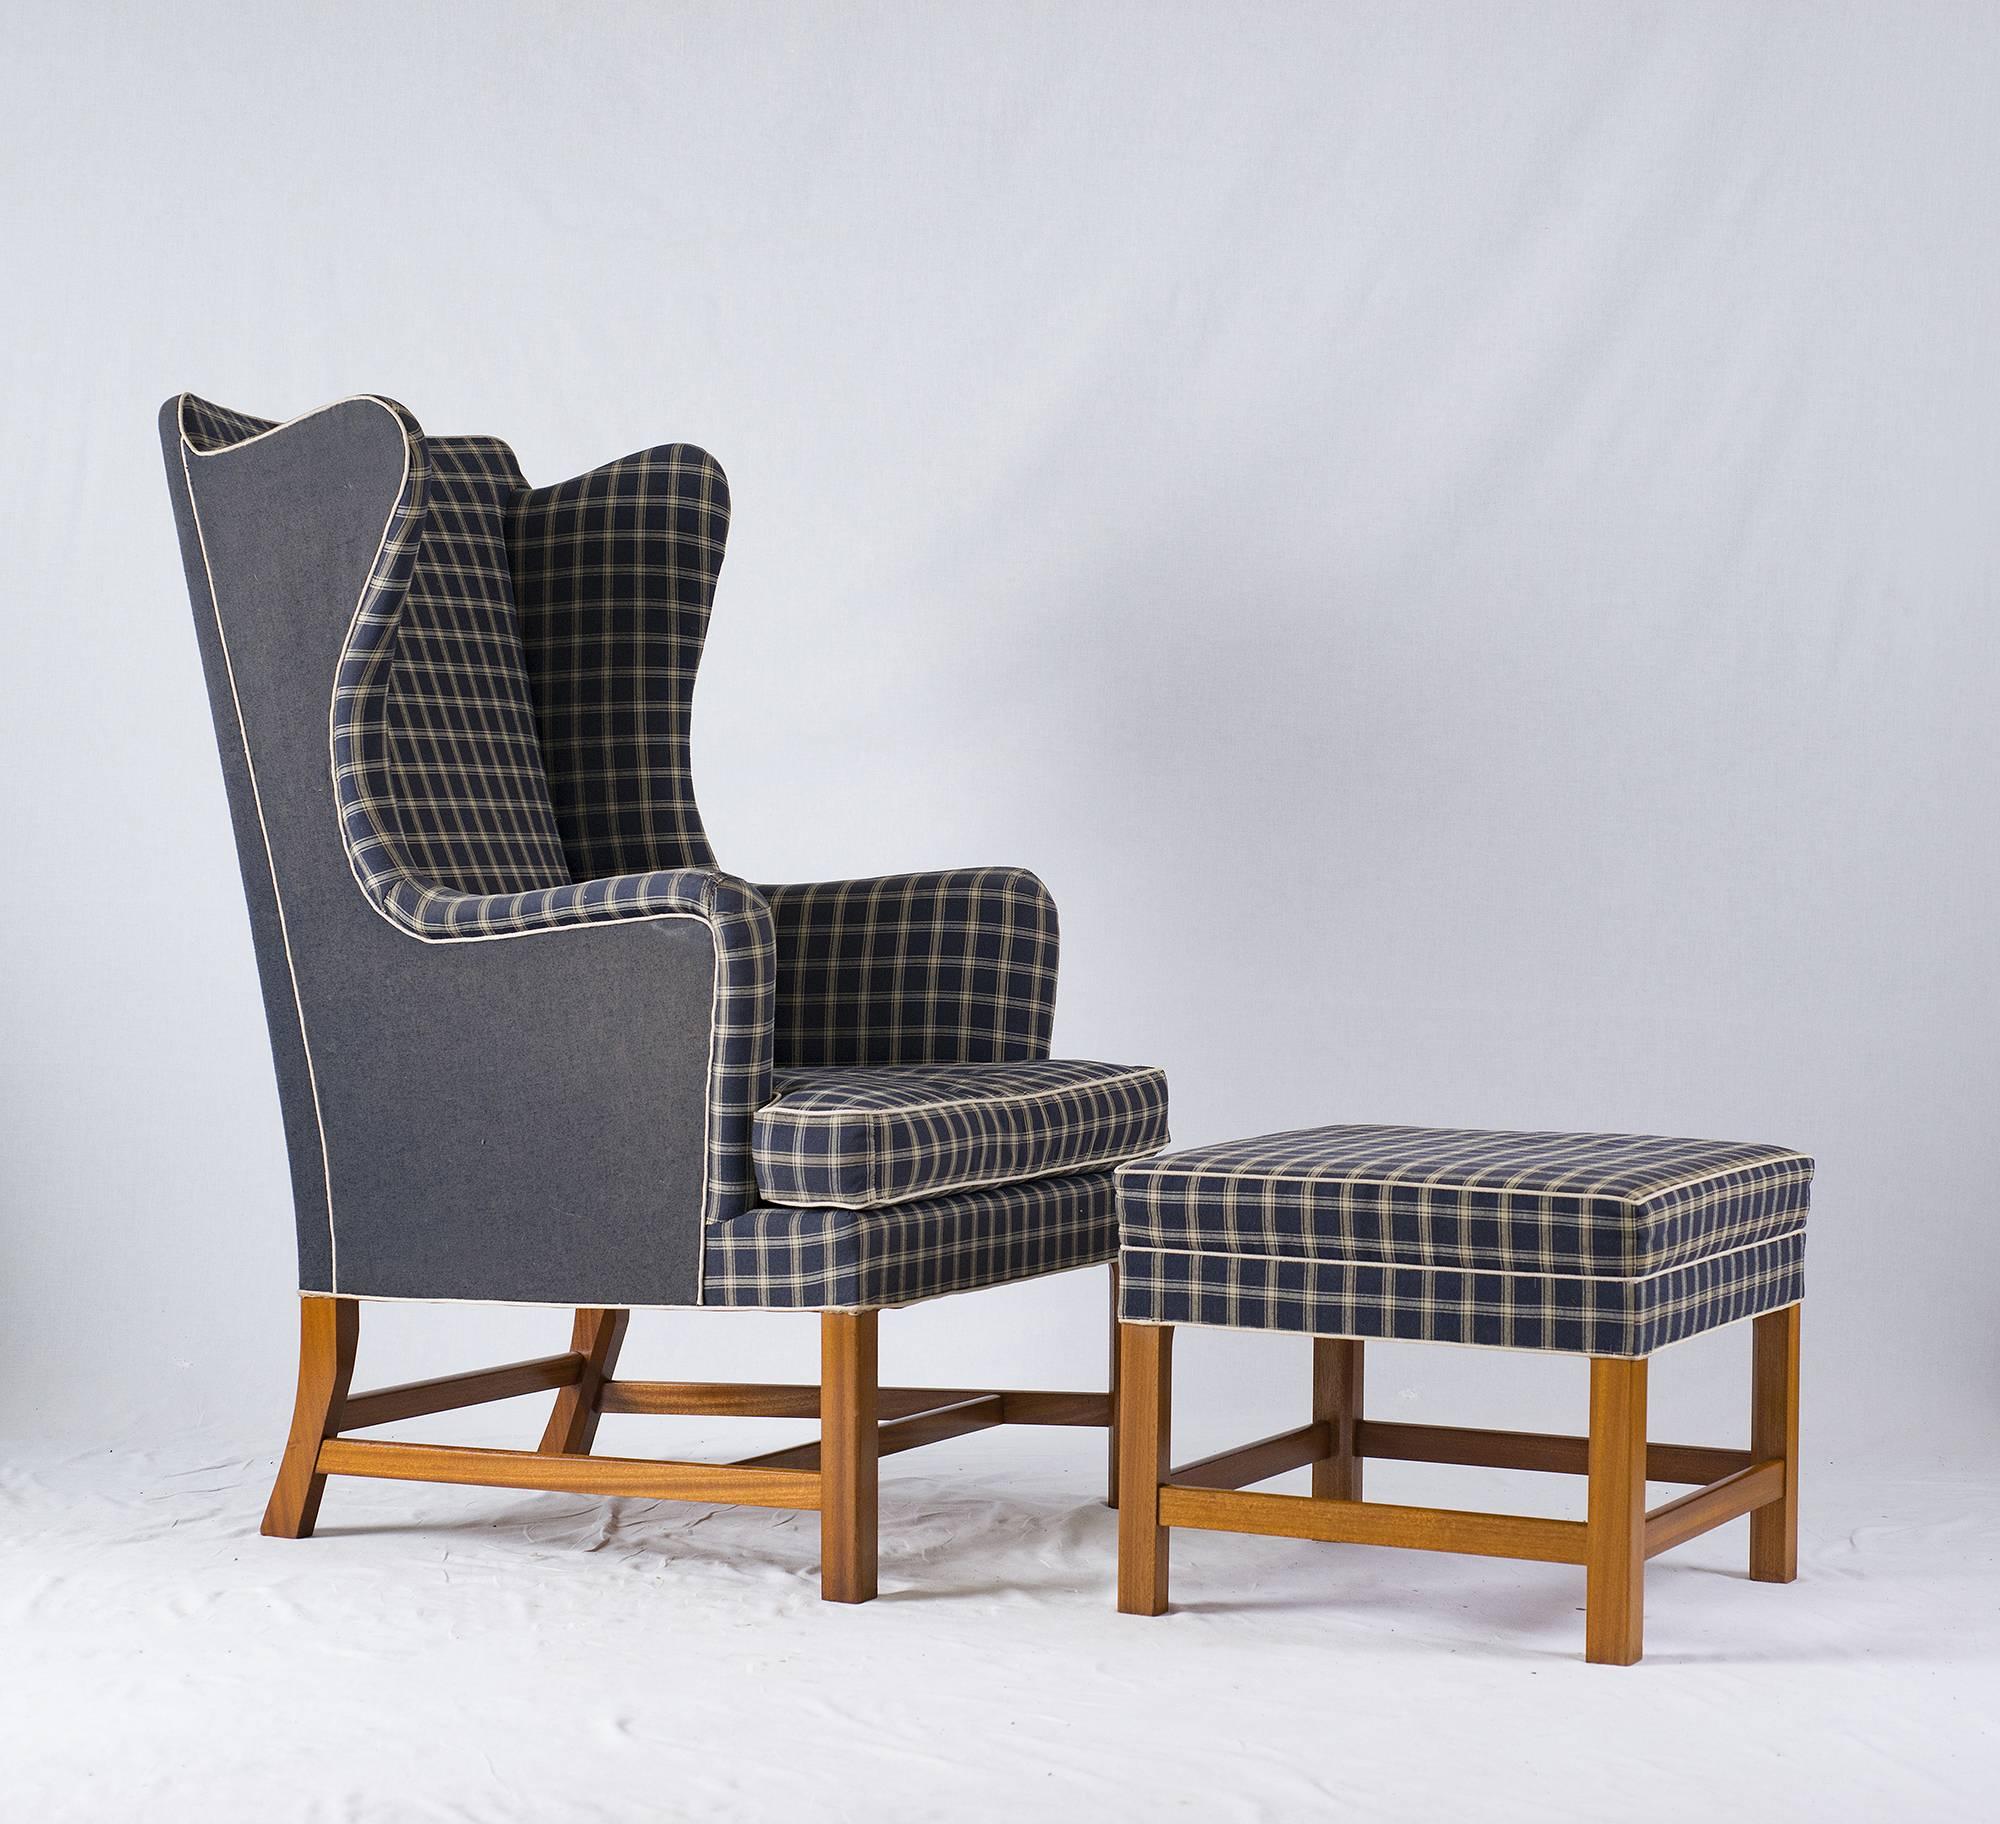 Kaare Klint wingback chair designed in 1941 and produced by Rud Rasmussen.